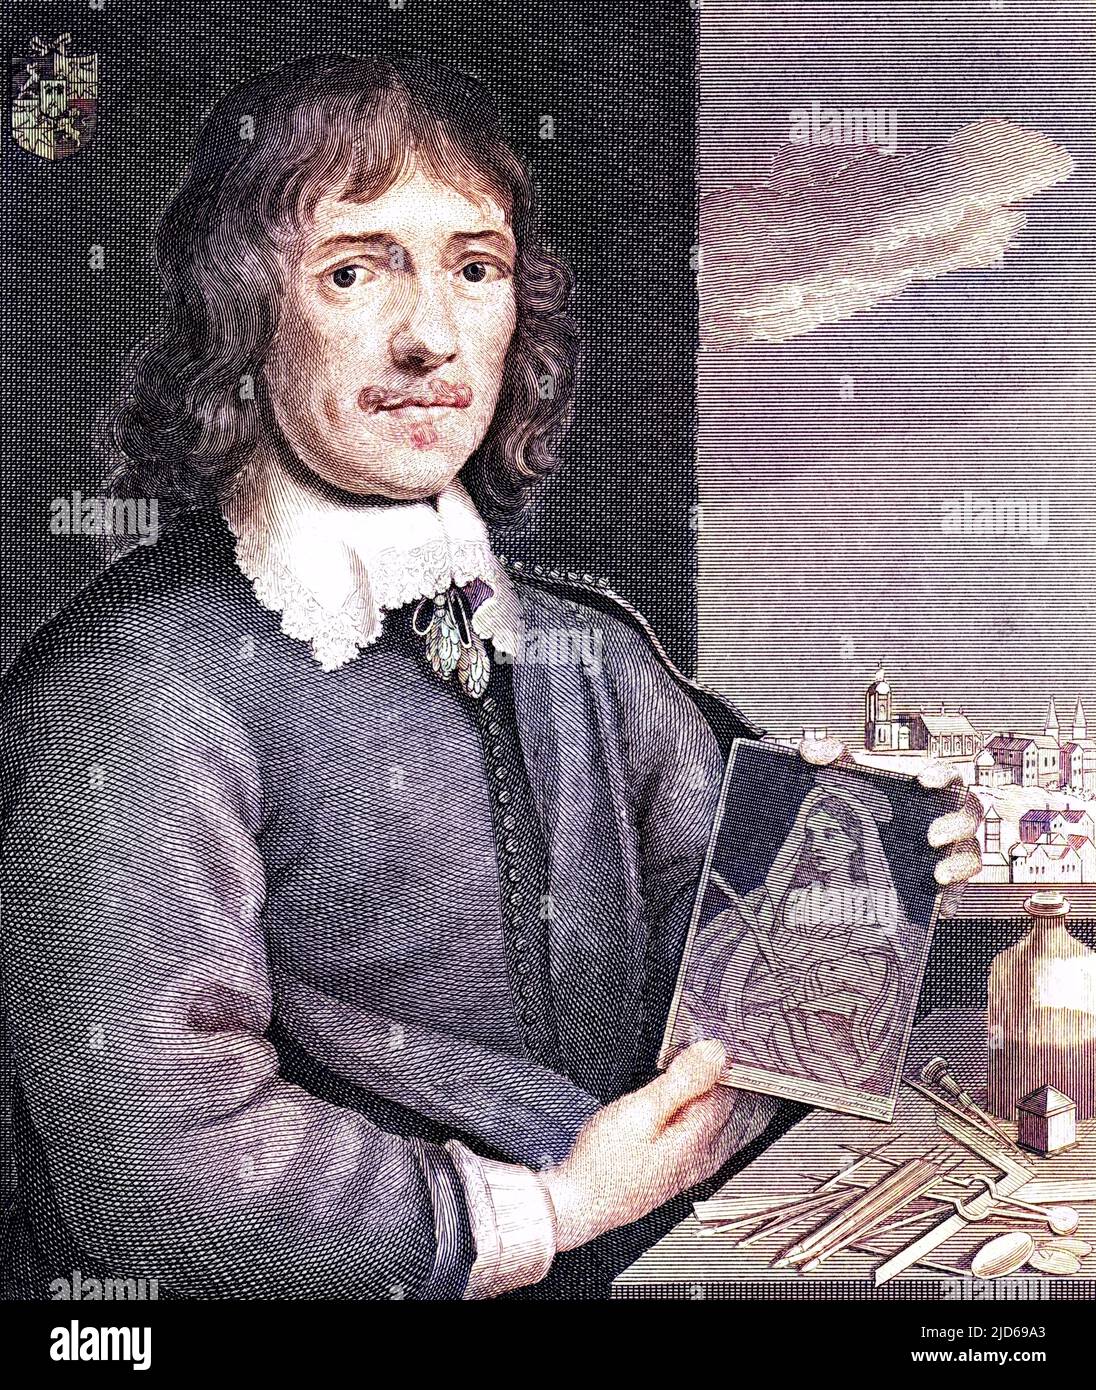 WENZEL (Wenceslas) HOLLAR Bohemian artist working mostly in England where he did superb portraits, London views and other subjects in his own inimitable style. Colourised version of : 10161063       Date: 1607 - 1677 Stock Photo